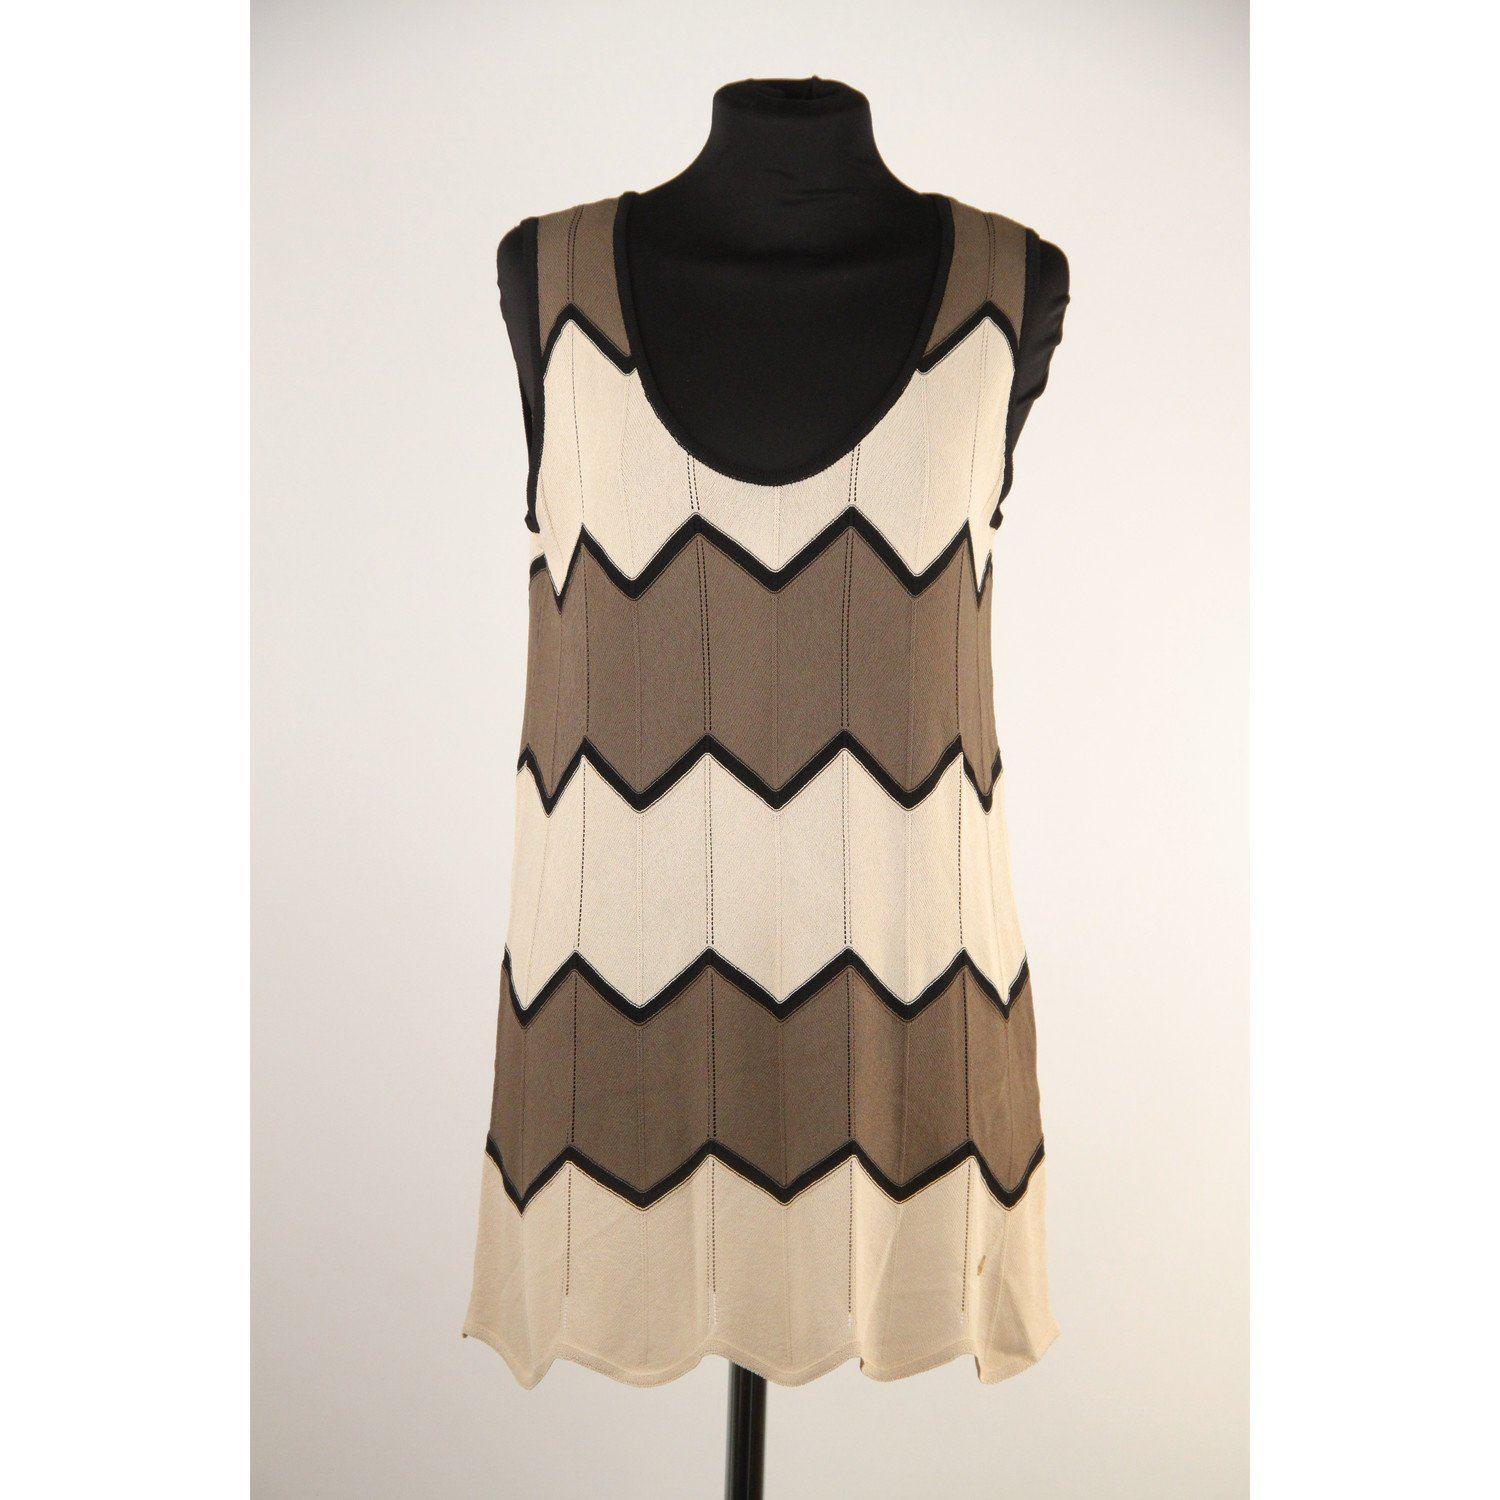 MATERIAL: Light Weight Knit COLOR: Beige, Taupe MODEL: Sleeveless Top GENDER: Women SIZE: Small CONDITION DETAILS: A+ :MINT CONDITION! Mint item. Never worn or used MEASUREMENTS: SHOULDER TO SHOULDER: 15.5 inches - 39,4 cm BUST: 18 inches - 45,7 cm